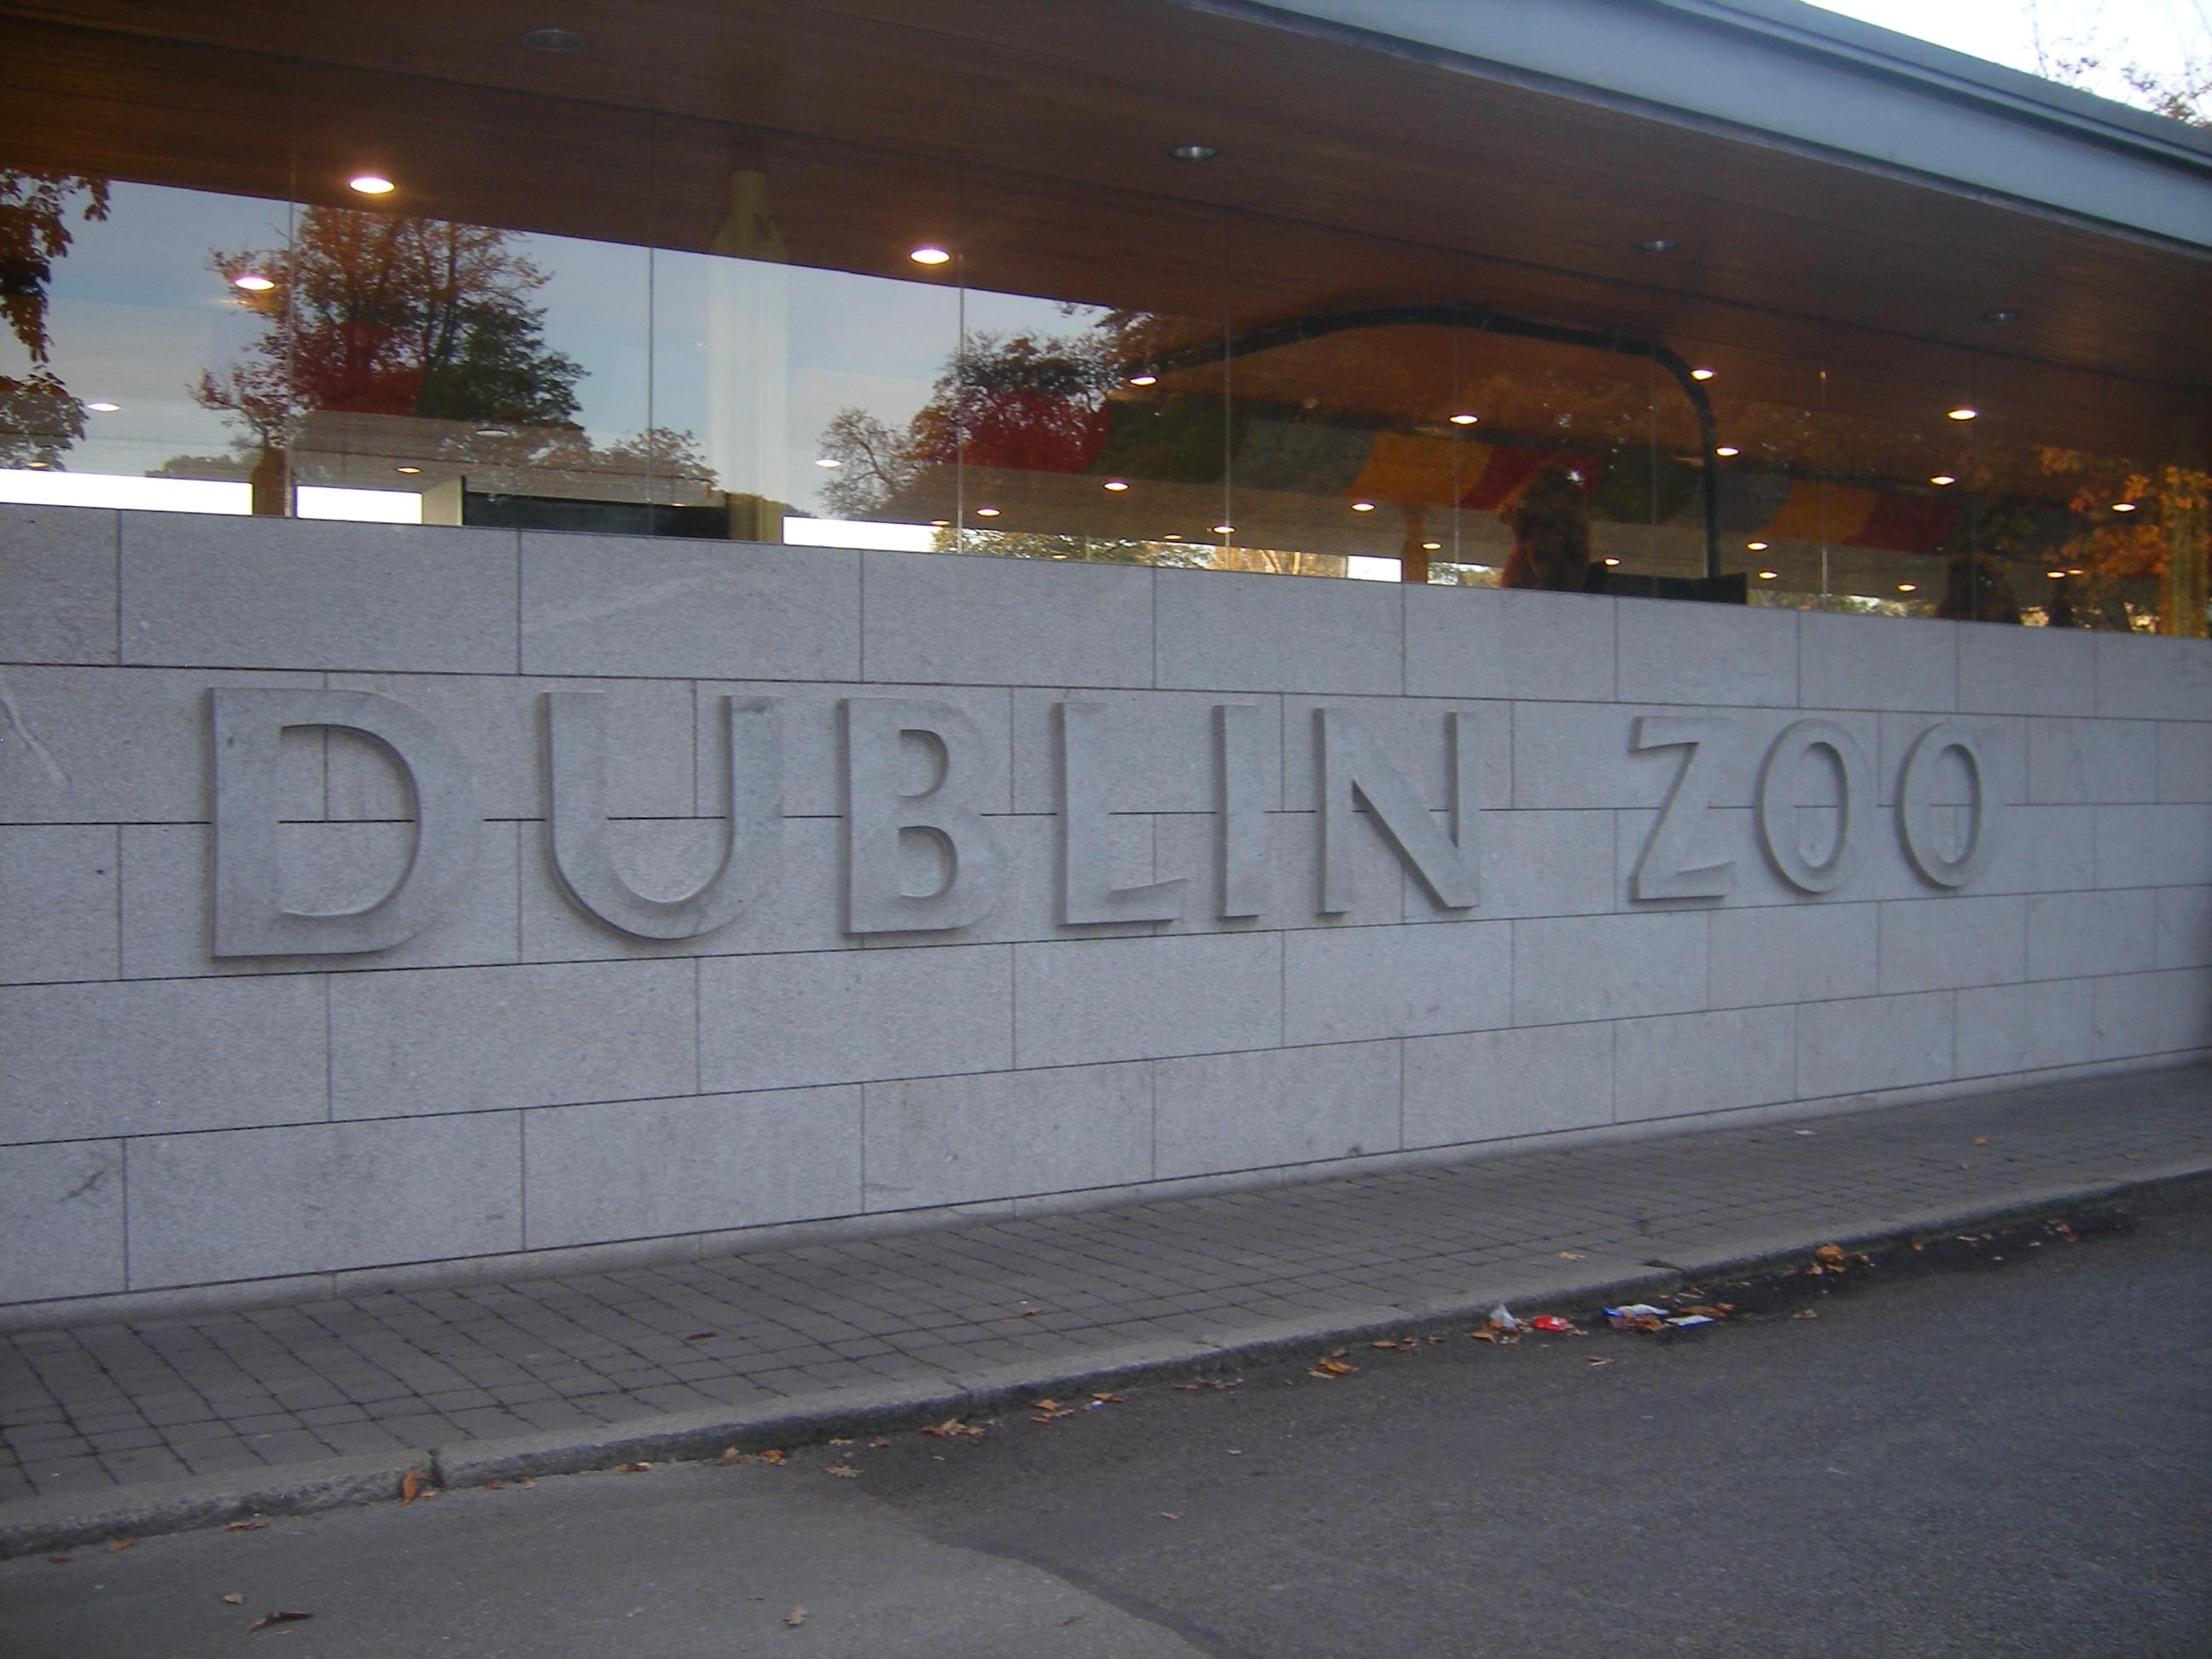 Dublin Zoo Overview